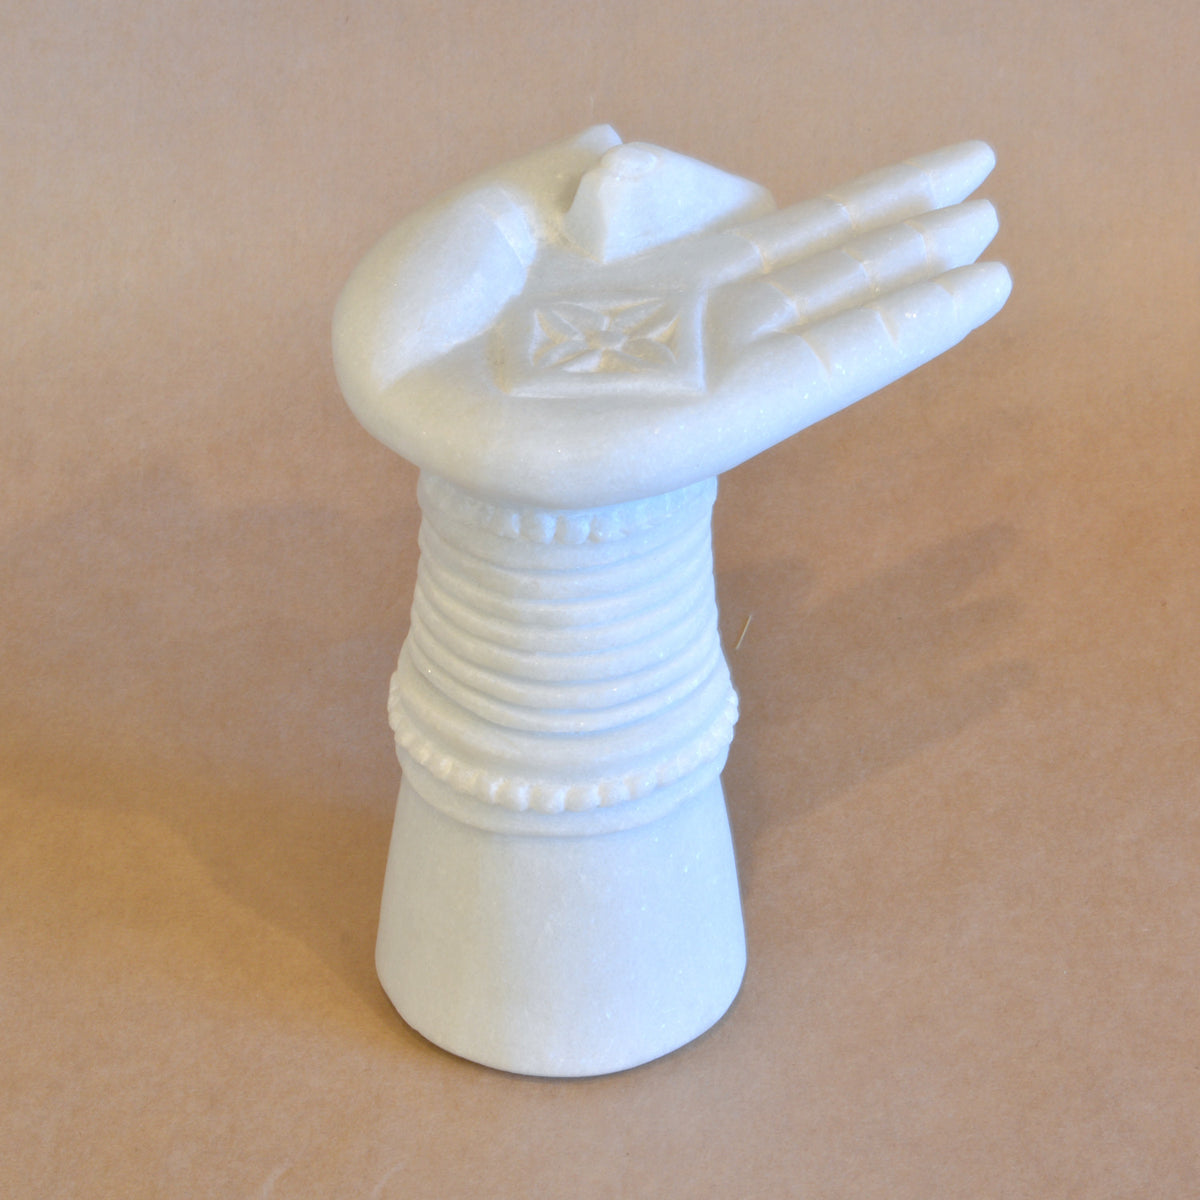 Buddha Hand carved from White Marble image 6 of 7